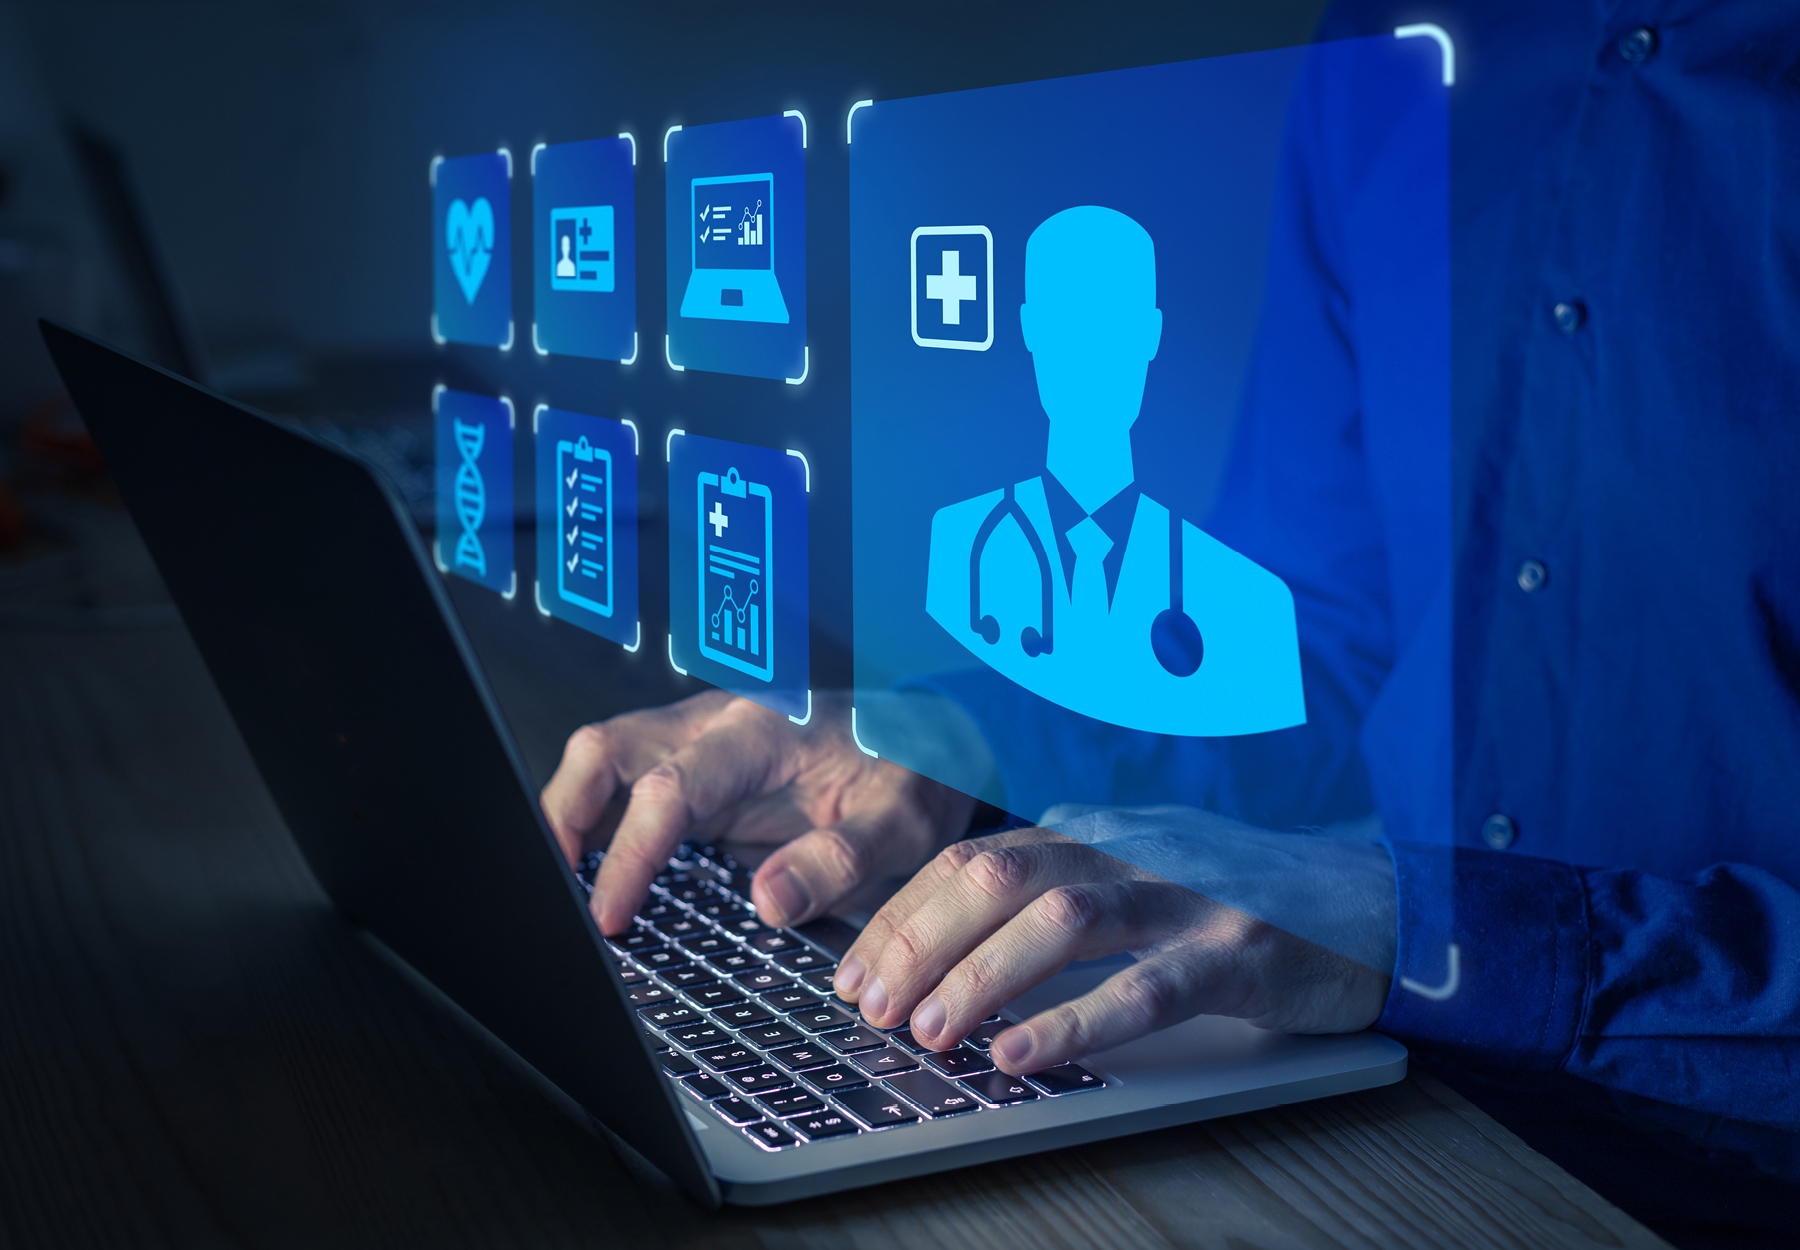 Closeup of someone typing on a laptop with blue medical-related graphic hovering over their hands. Dark background. Healthcare fraud concept. iStock image.